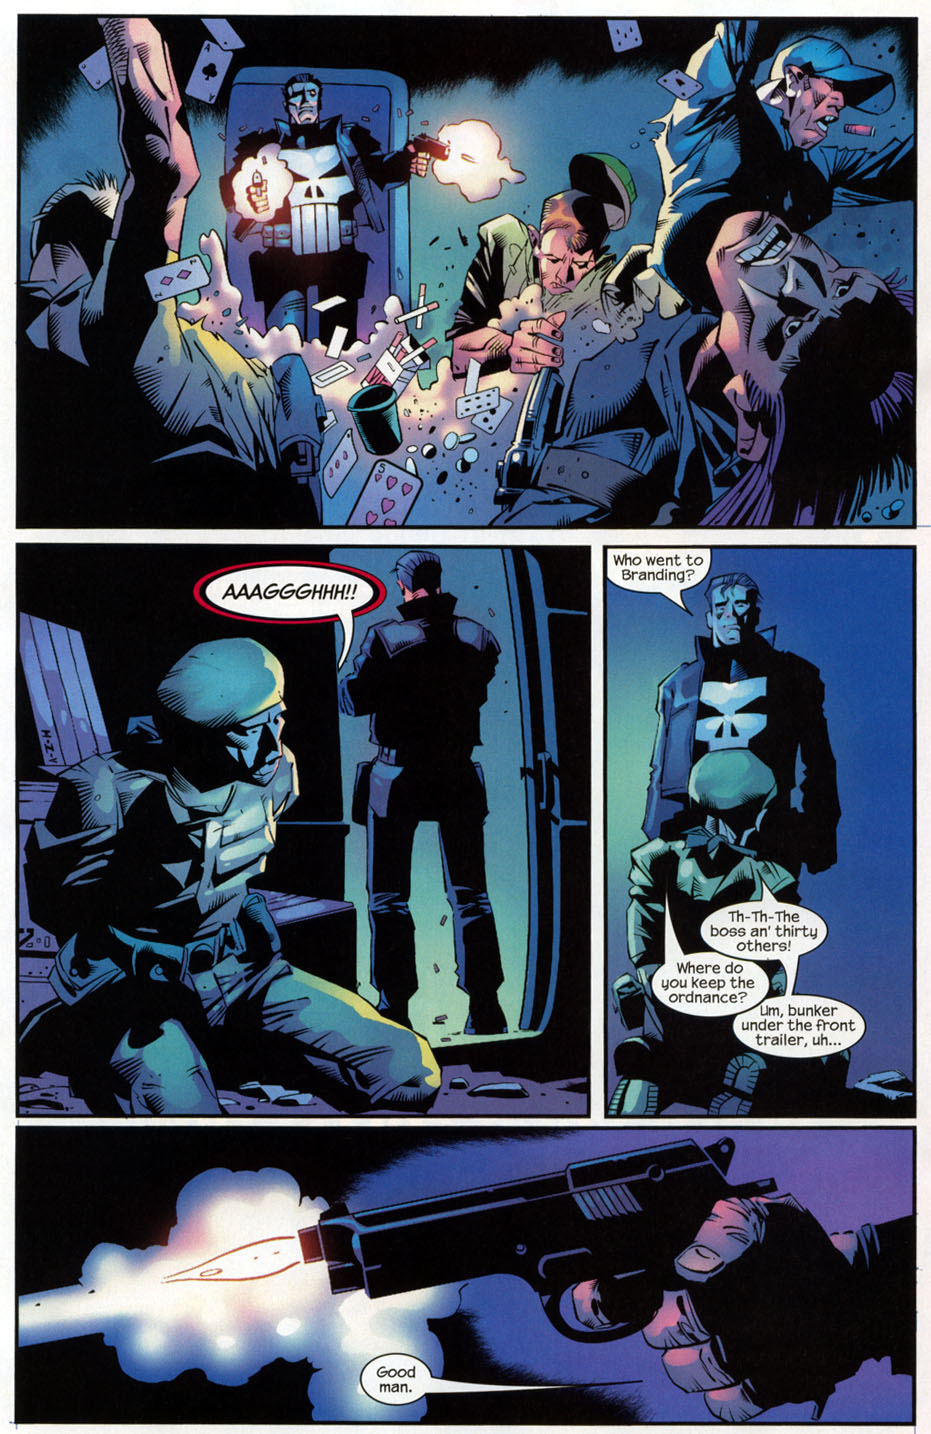 The Punisher (2001) issue 30 - Streets of Laredo #03 - Page 13